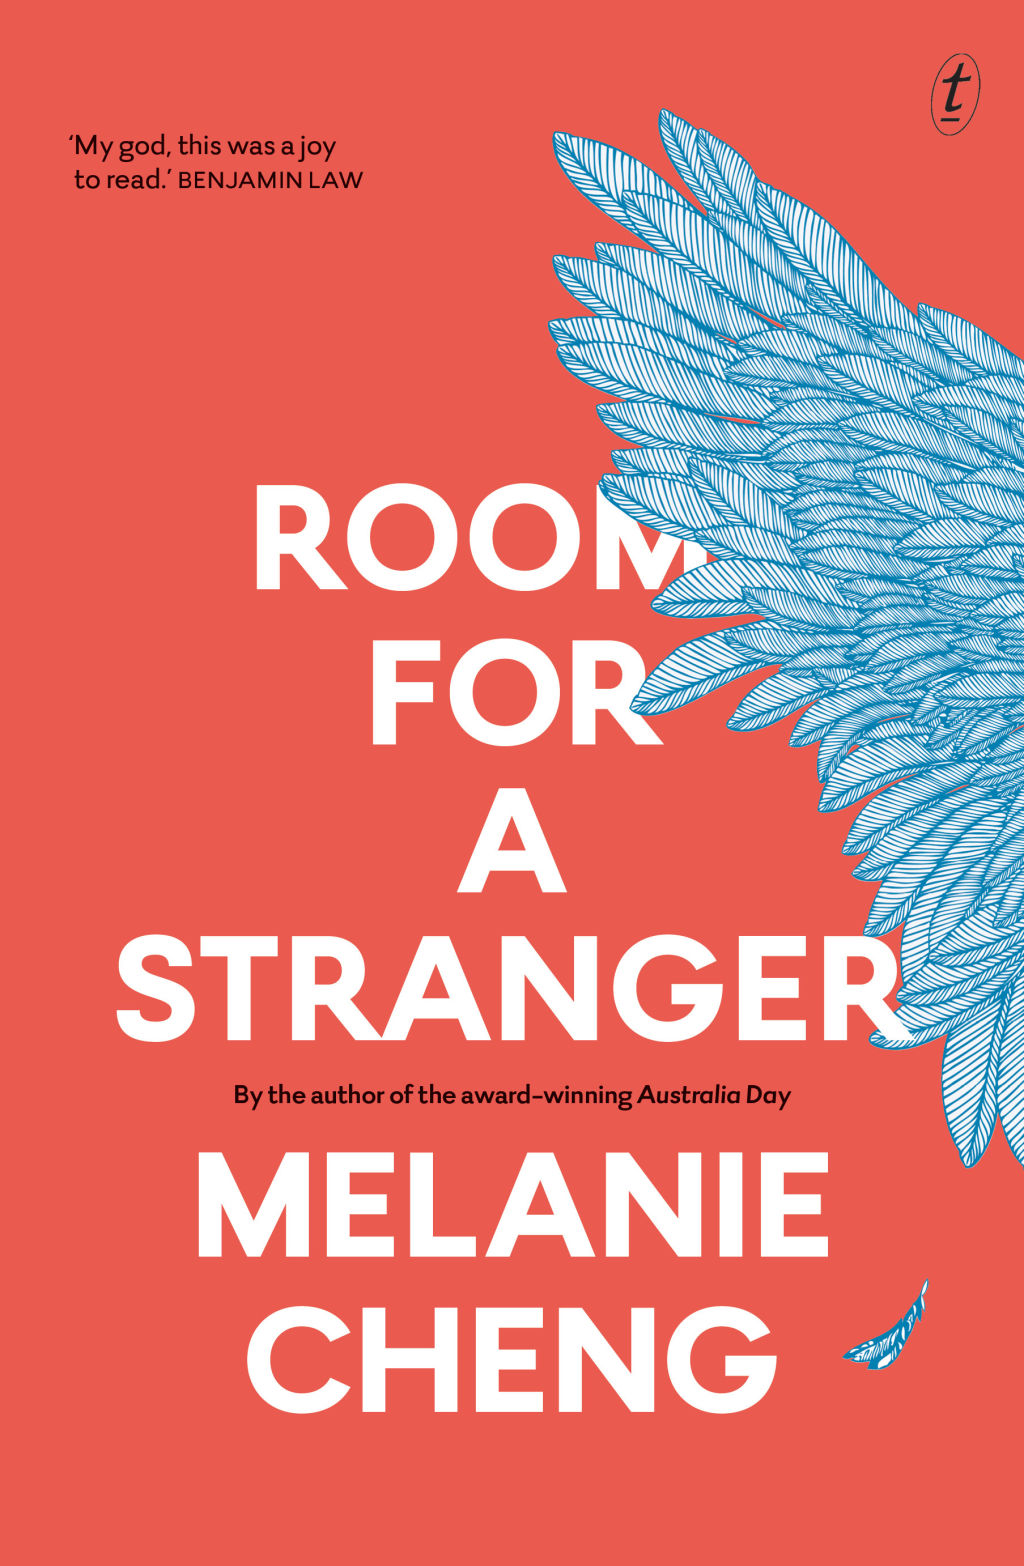 ROOM FOR A STRANGER  By Melanie Cheng $29.99, out now ● textpublishing.com.au